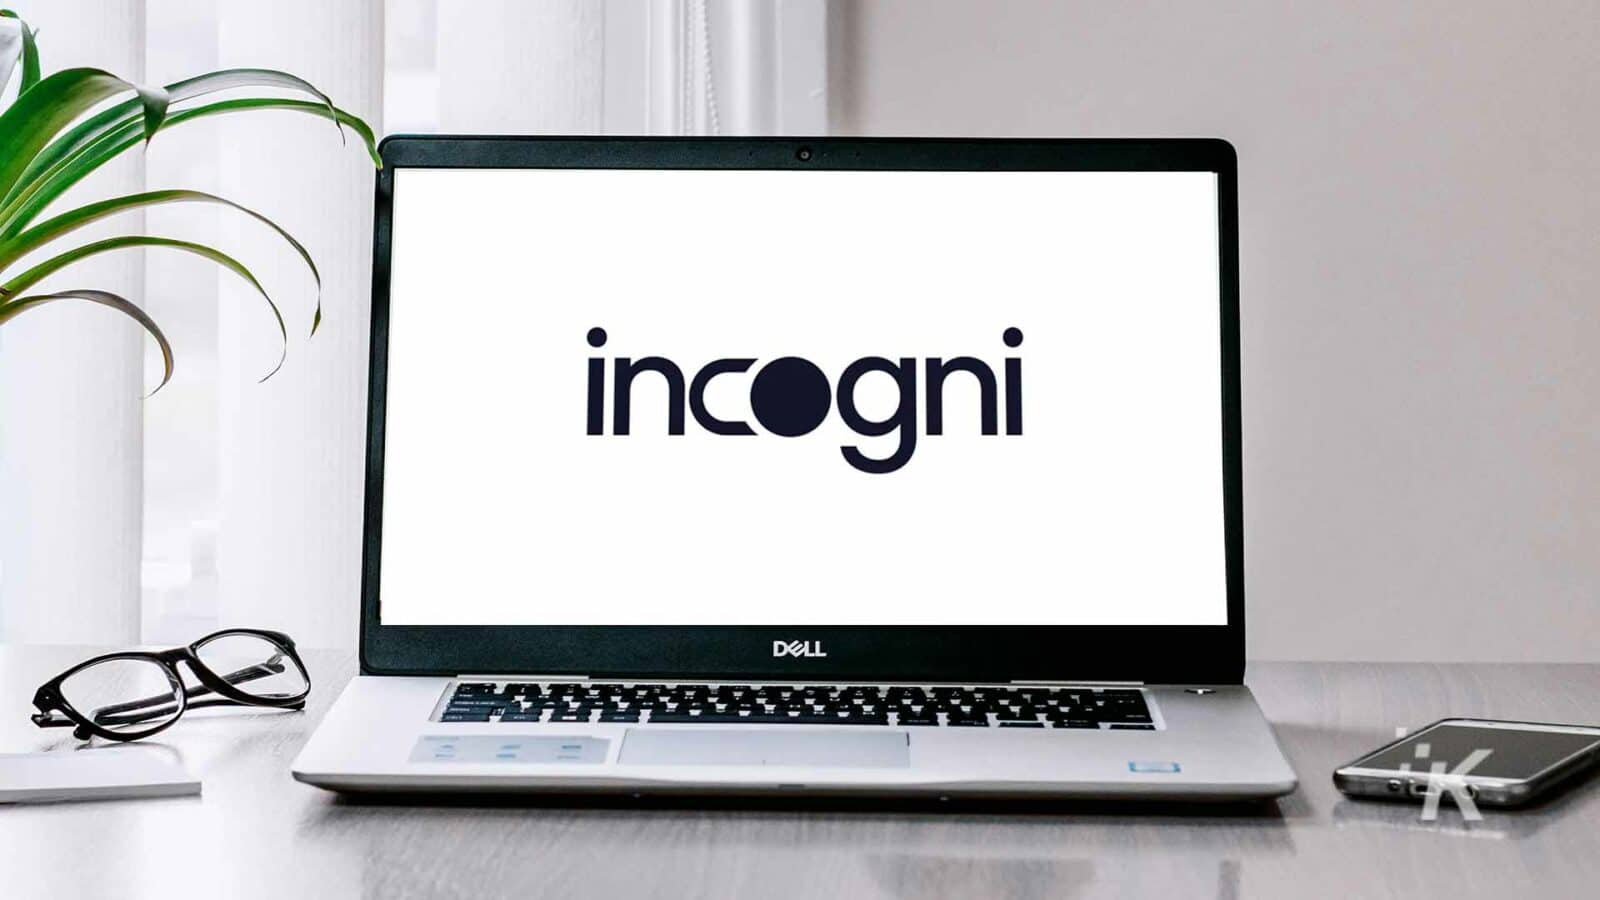 Incogni on a laptop.